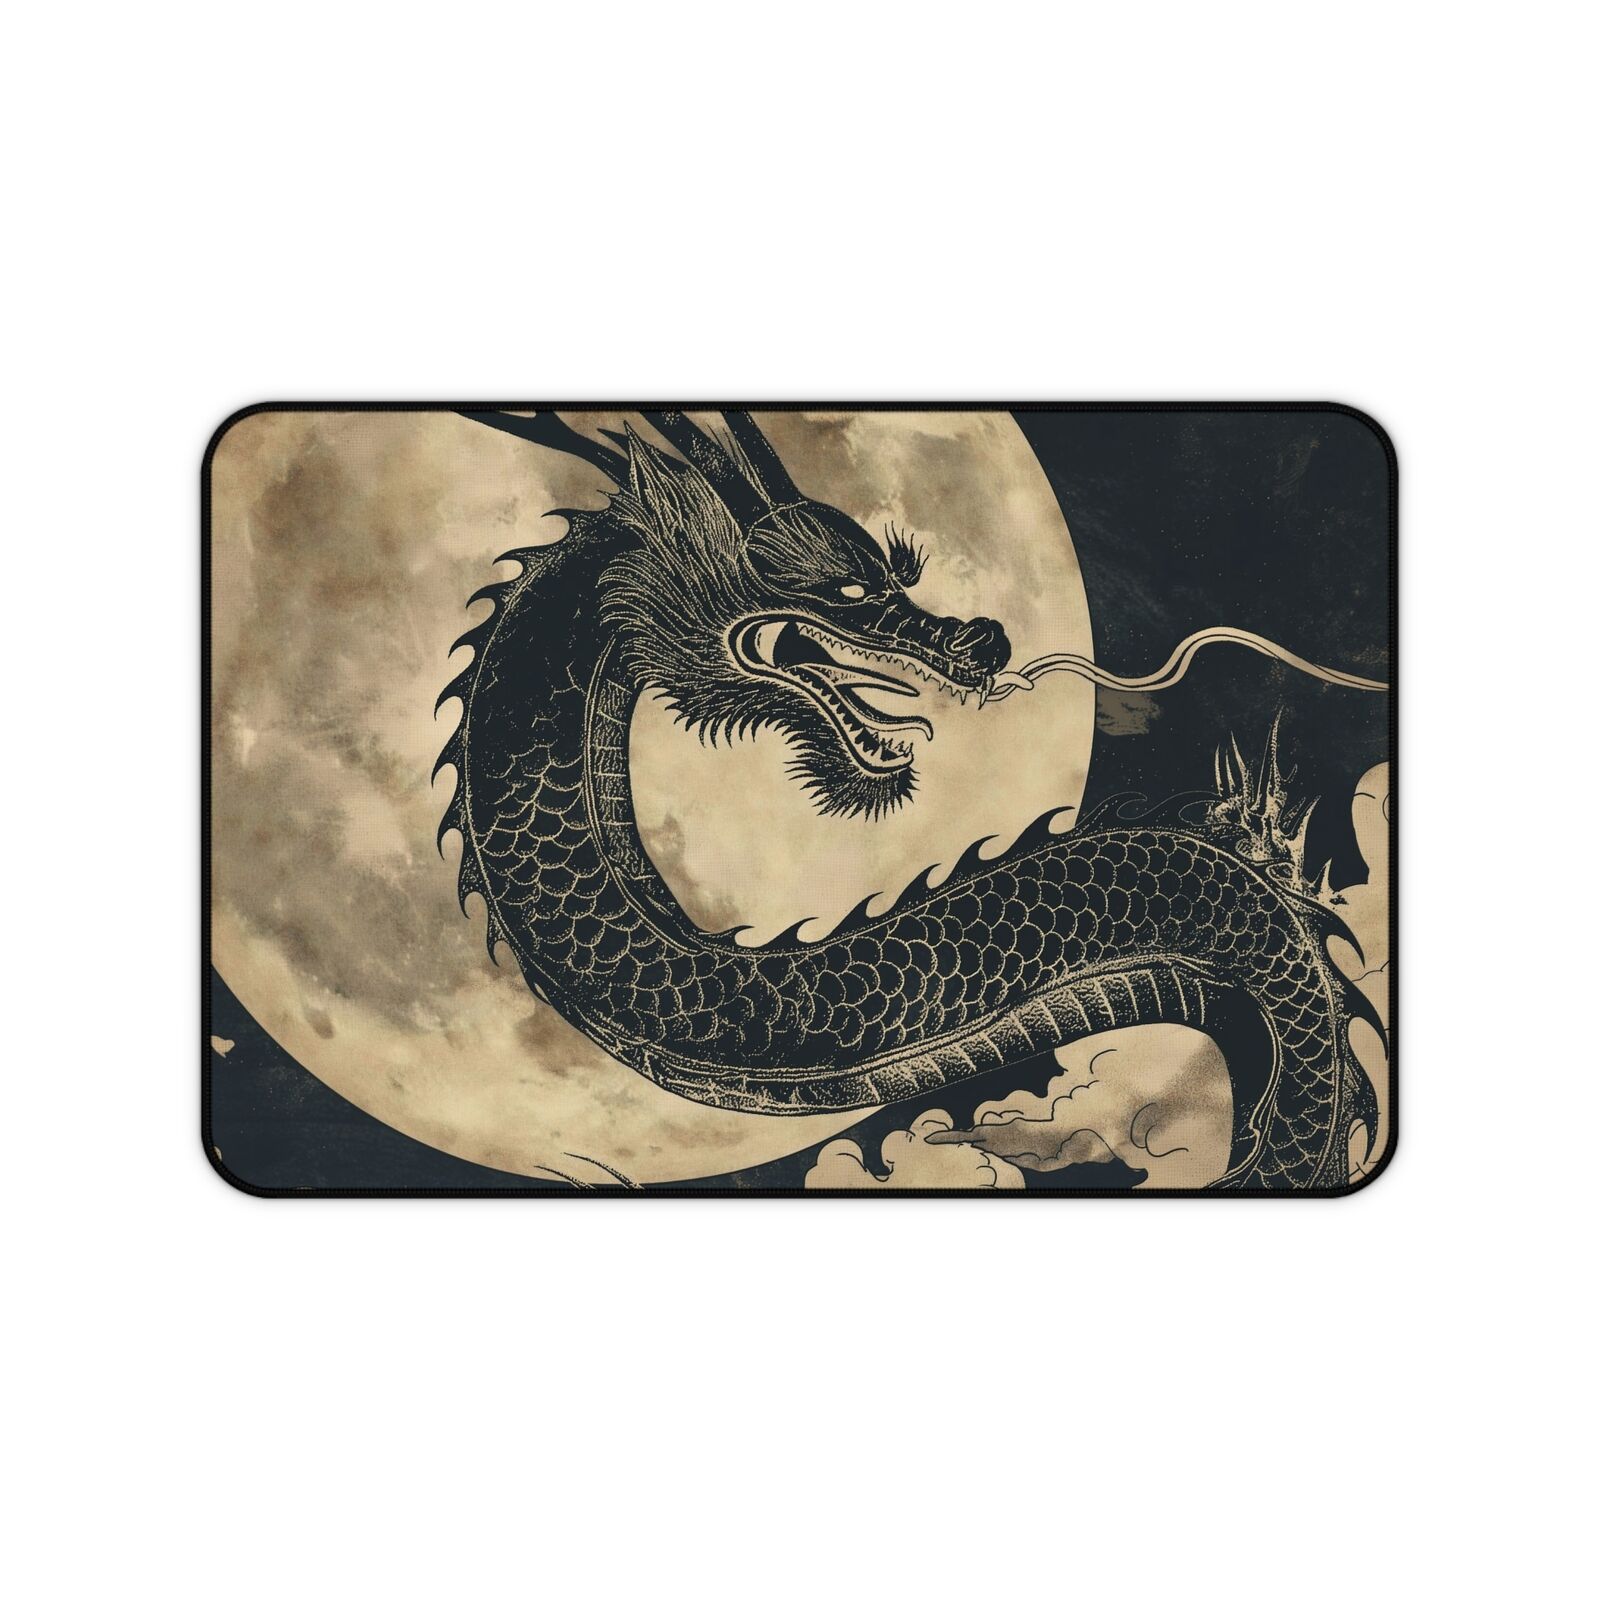 Eastern Dragon Desk Mat – Mythical Large Mouse Pad, 3 Sizes